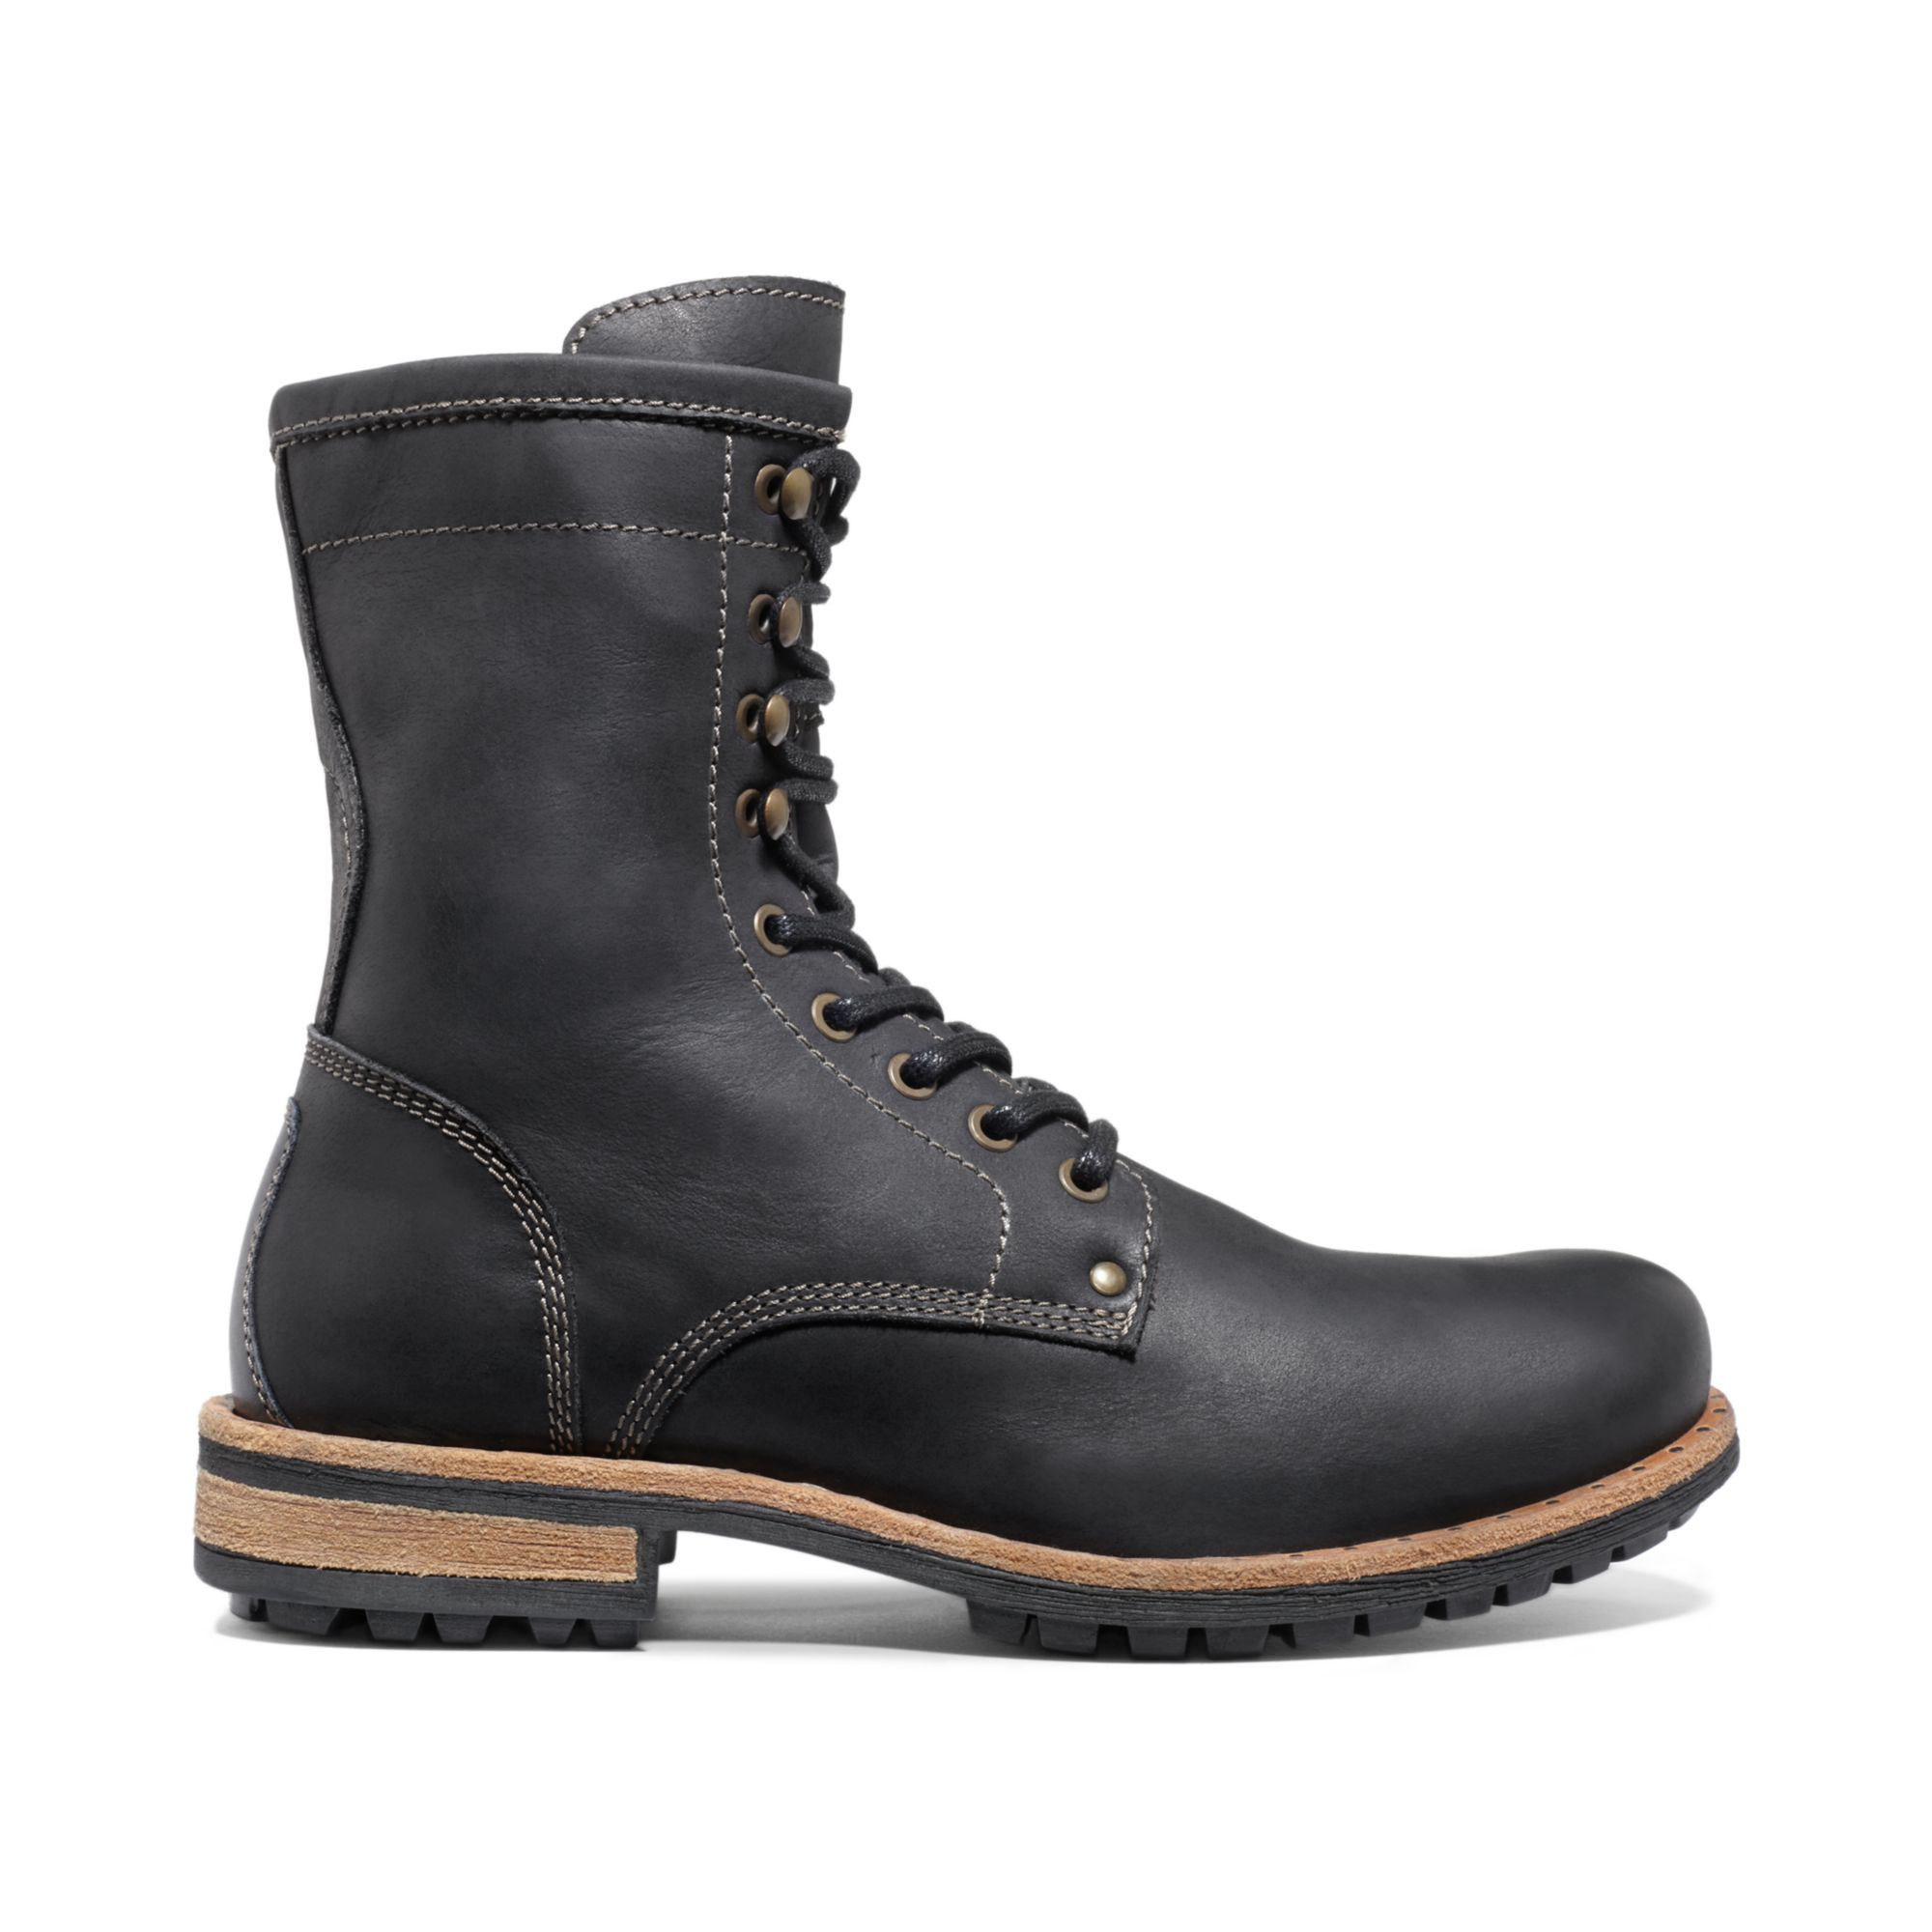 Lyst - Kenneth Cole Reaction Nailed It Laceup Boots in Black for Men